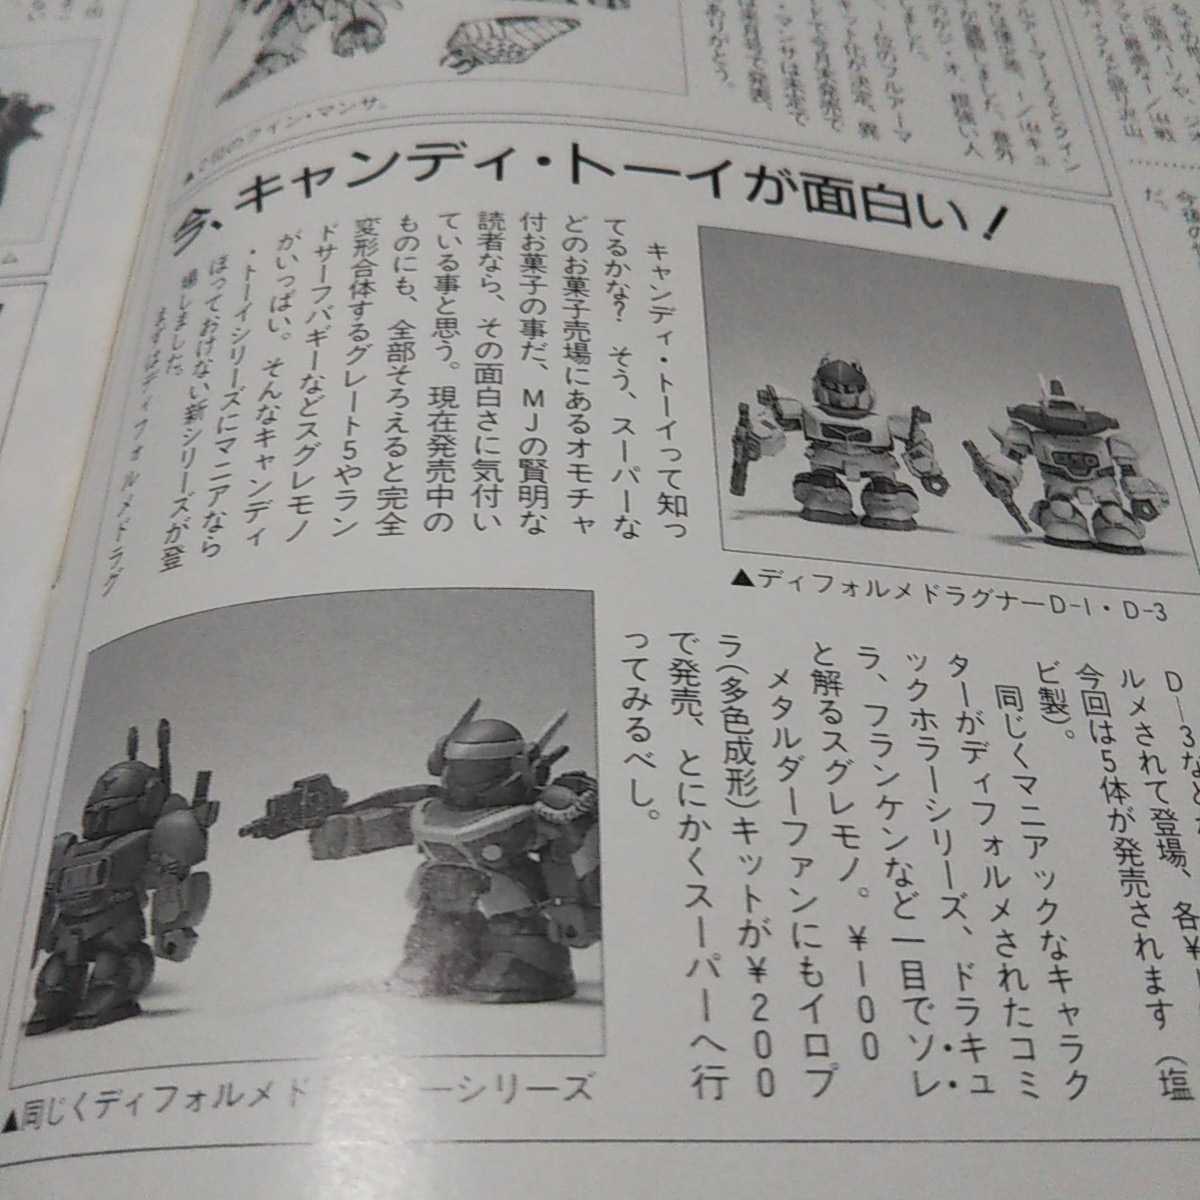  Bandai model information 1987 7 month number No.96 Char's Counterattack 